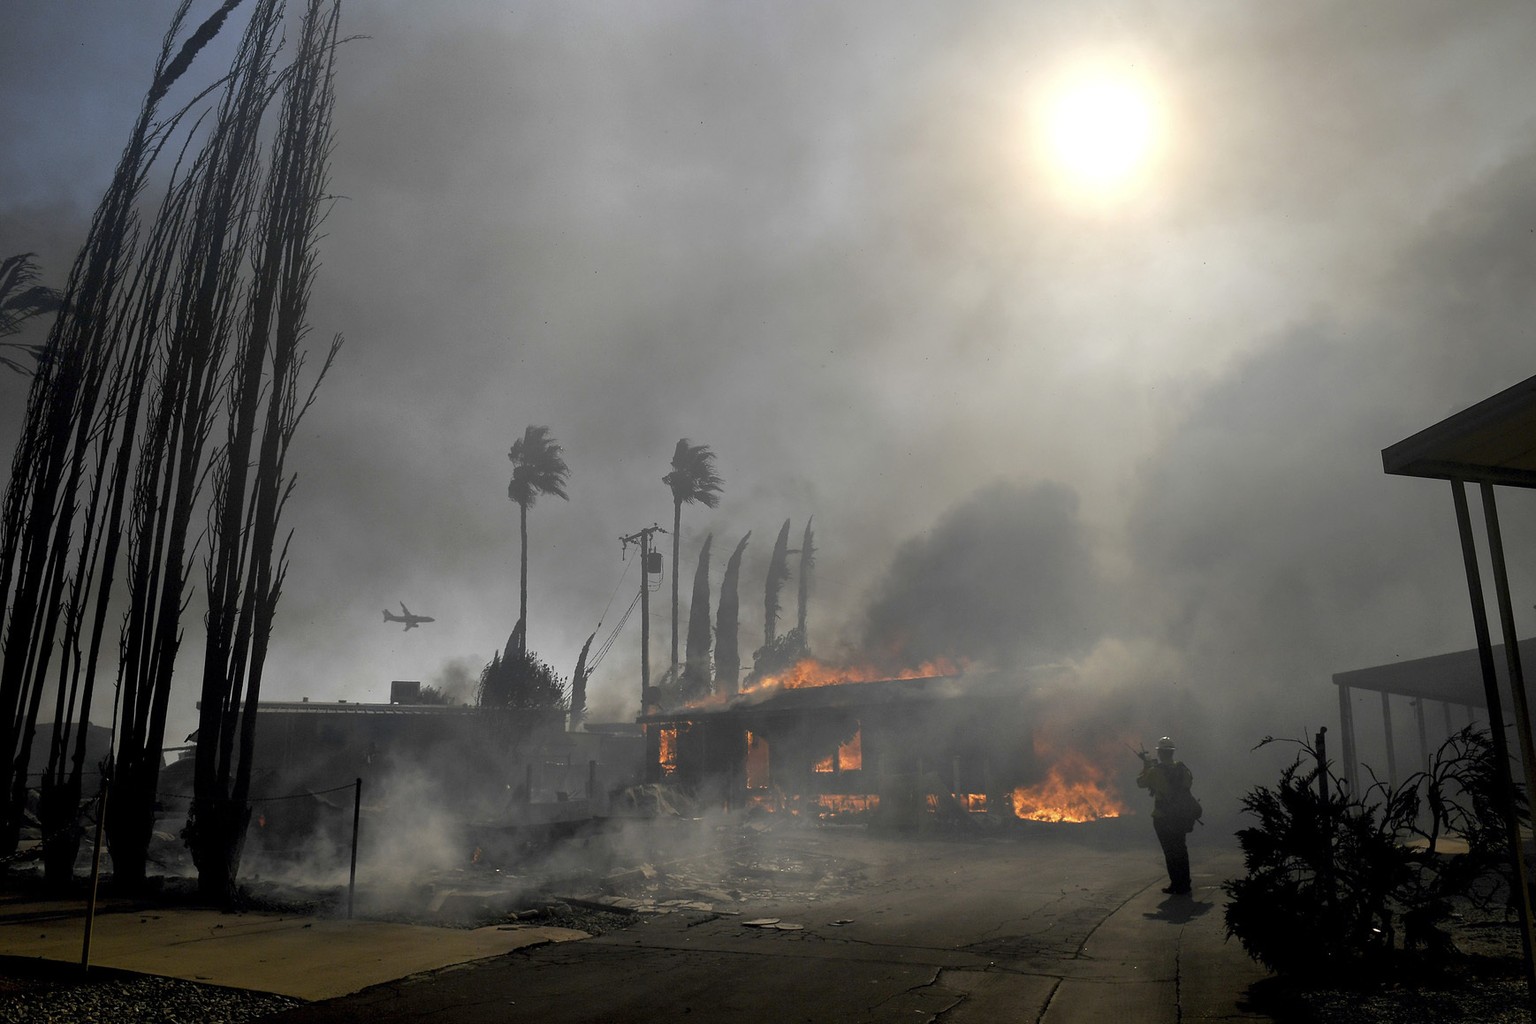 Firefighters battle the Sandalwood Fire as it destroys homes in the Villa Calimesa Mobile Home Park in Calimesa, Calif., on Thursday, Oct. 10, 2019. Burning trash dumped along a road sparked a wildfir ...